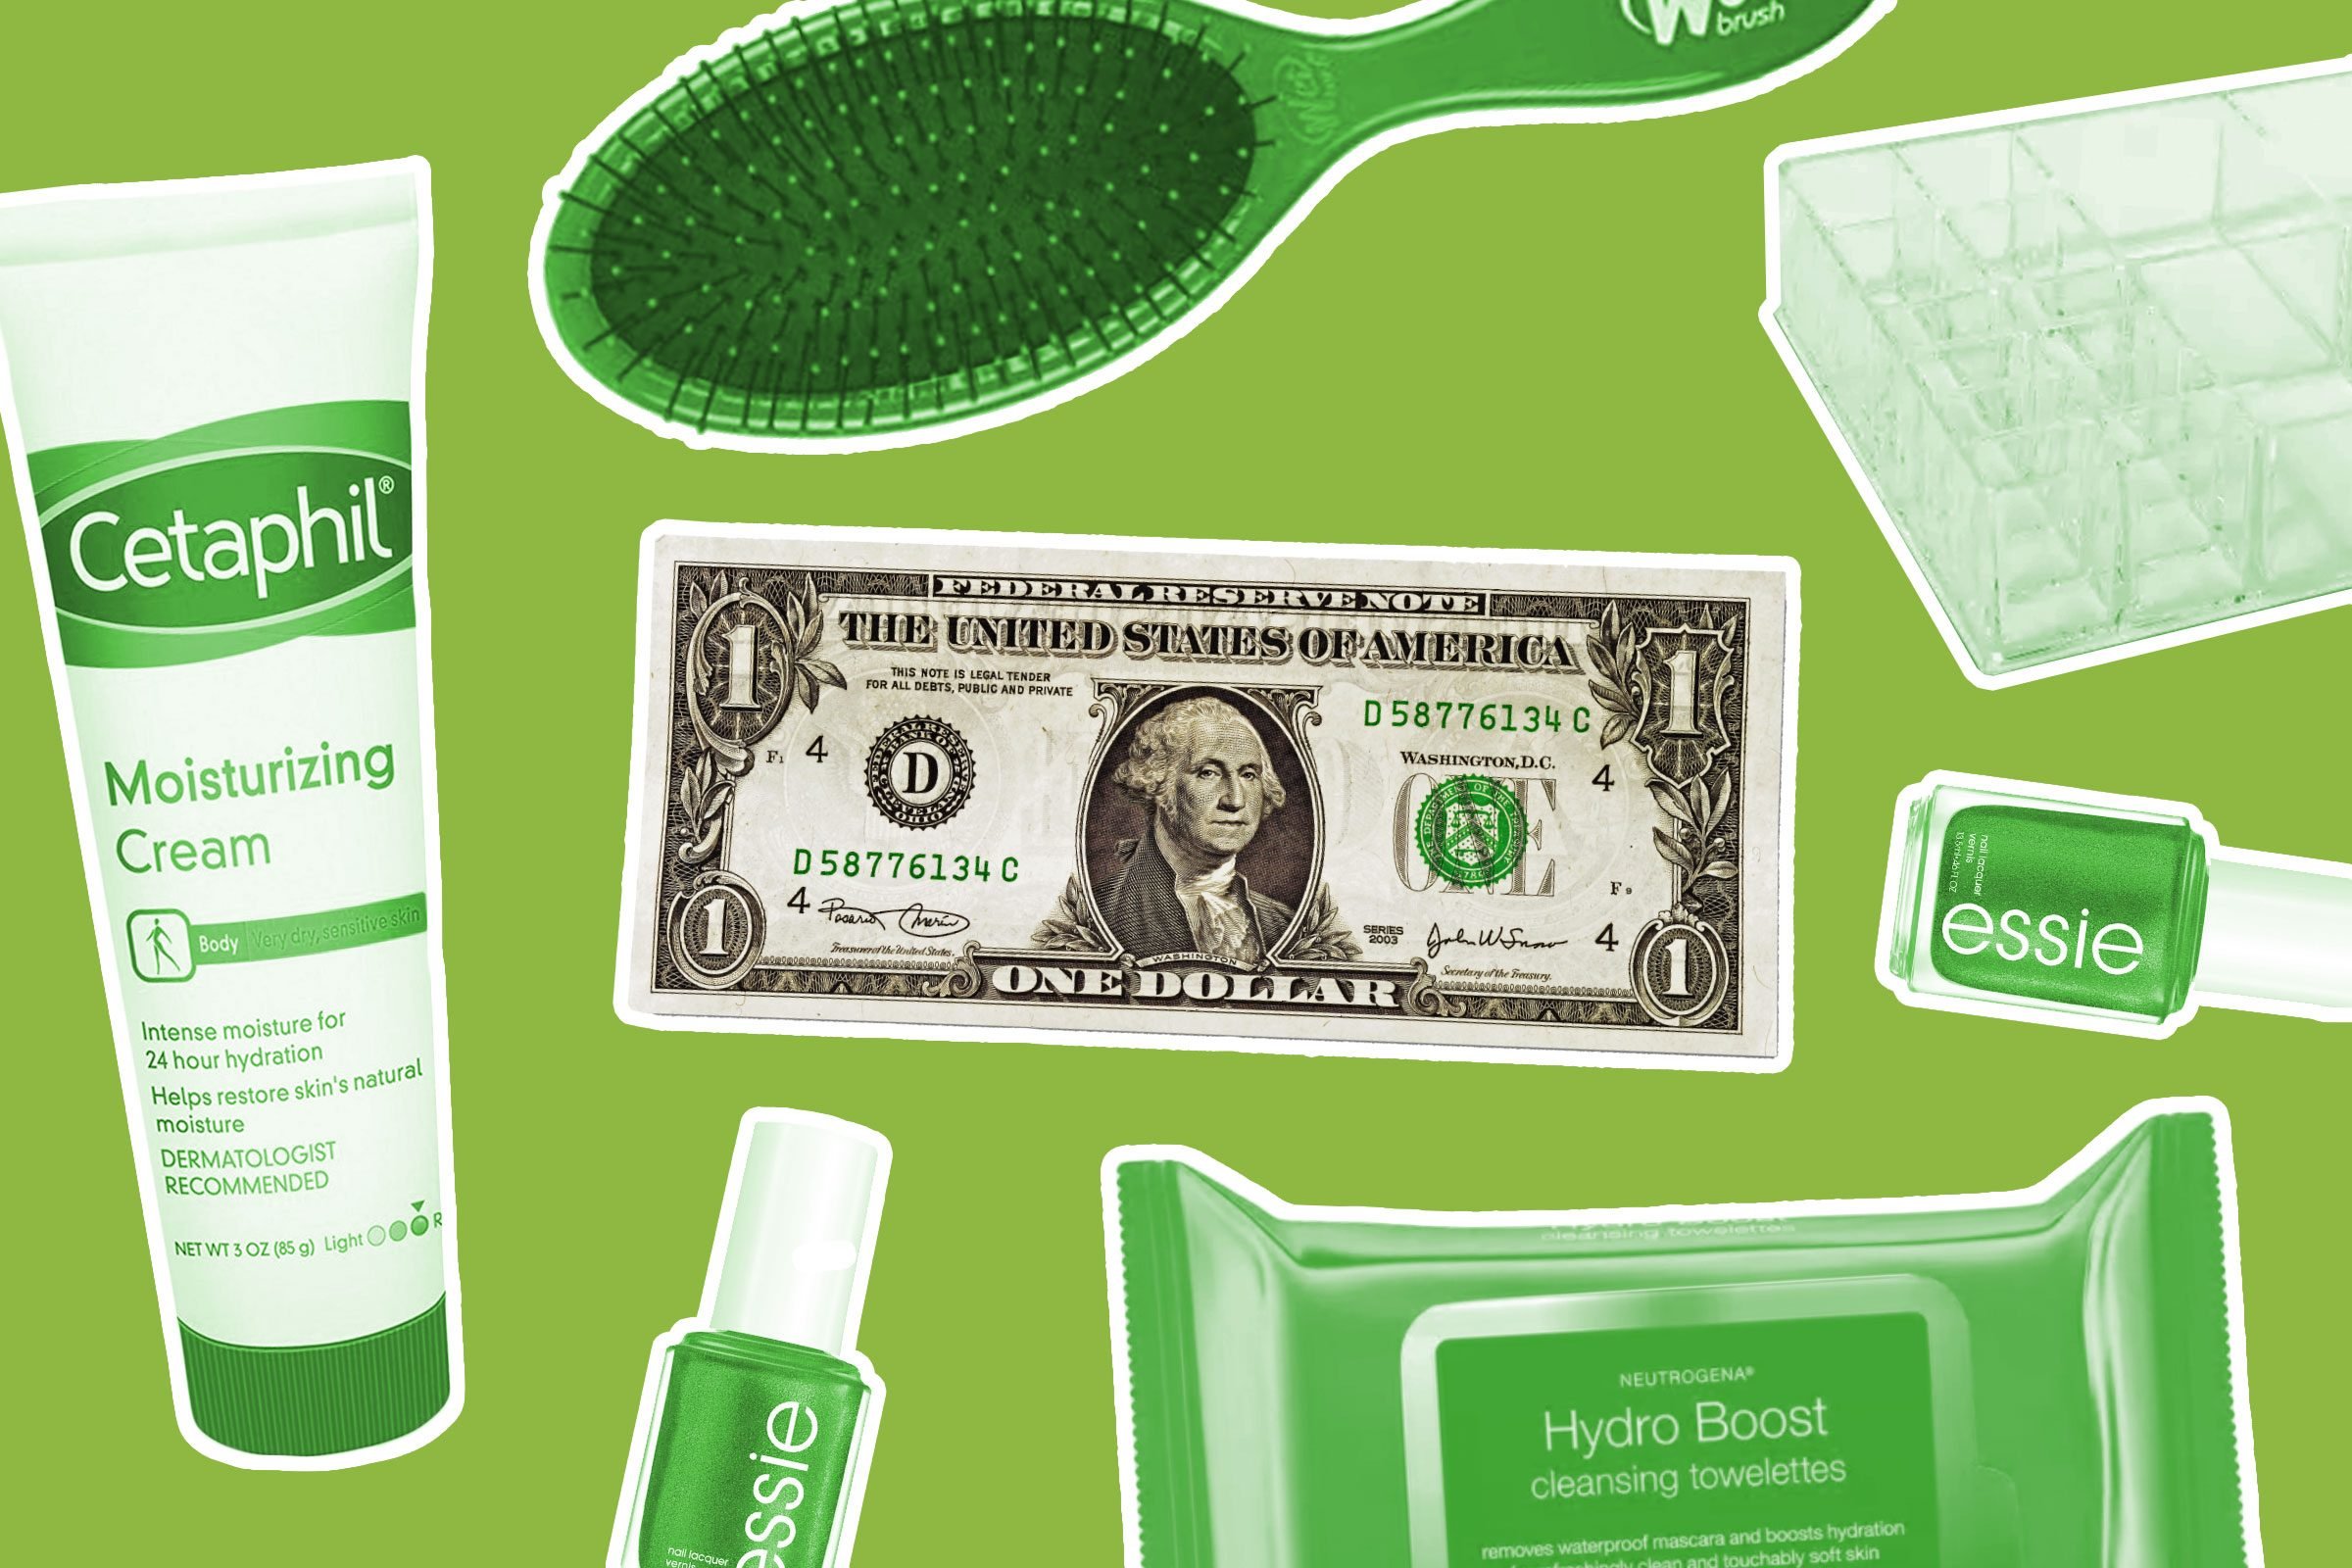 Beauty Items You Should Buy at Dollar Stores | Reader's Digest